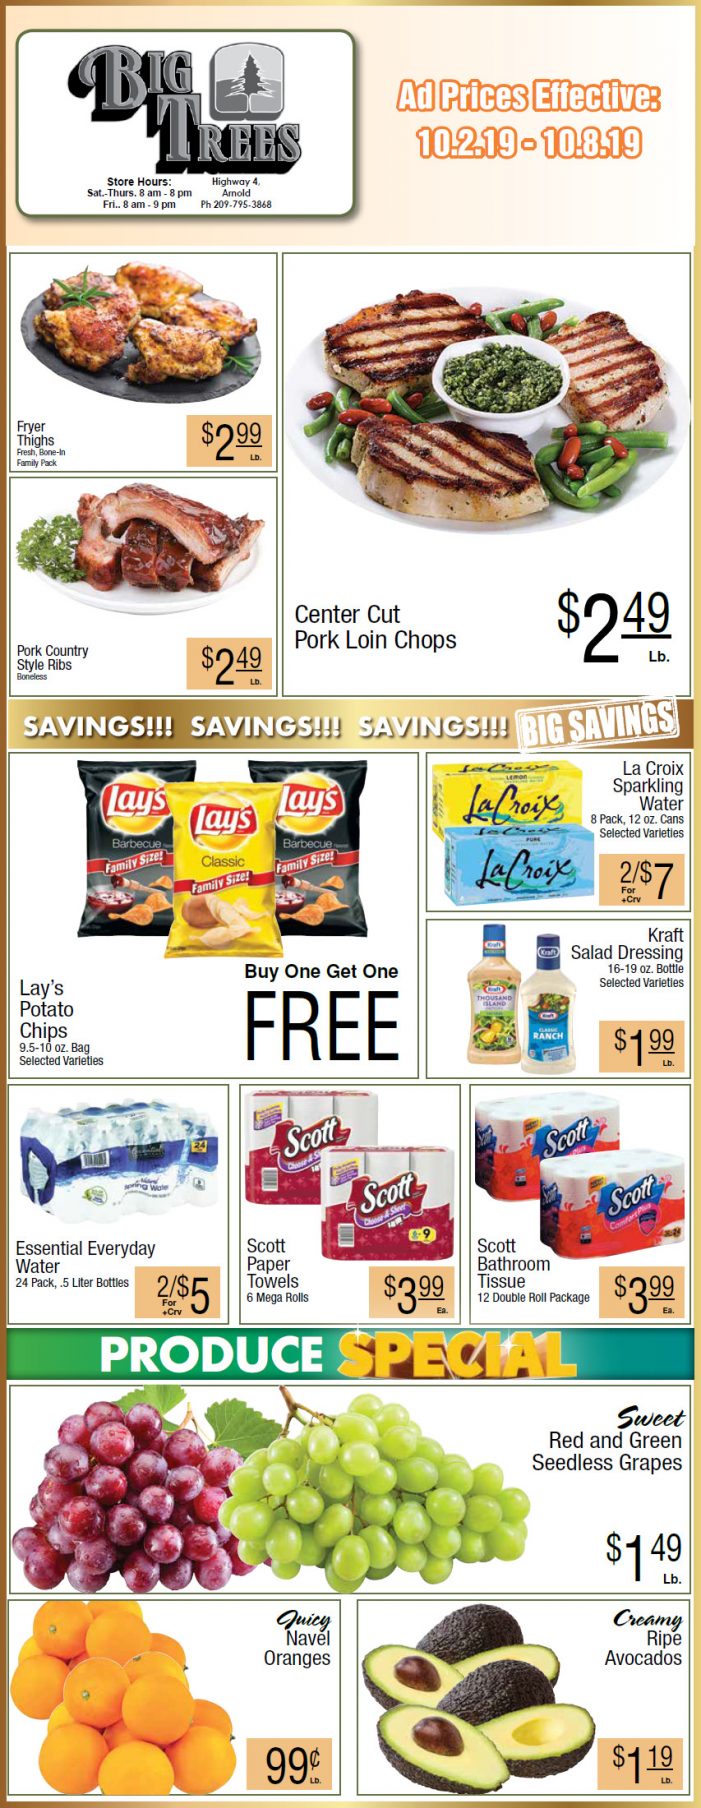 Big Trees Market Weekly Ad & Grocery Specials Through October 8th!  Shop Local & Save!